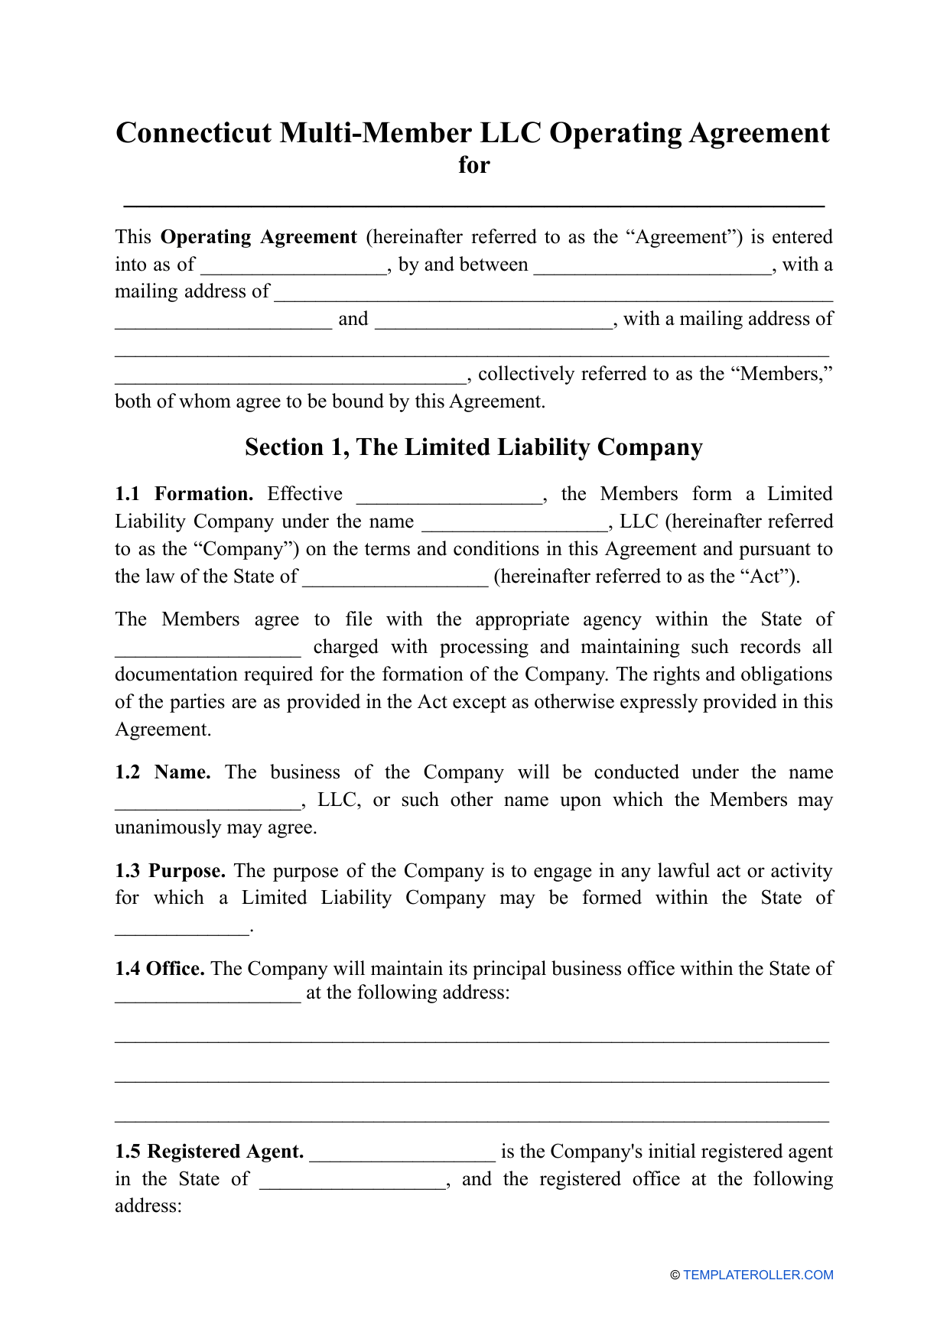 Multi-Member LLC Operating Agreement Template - Connecticut, Page 1